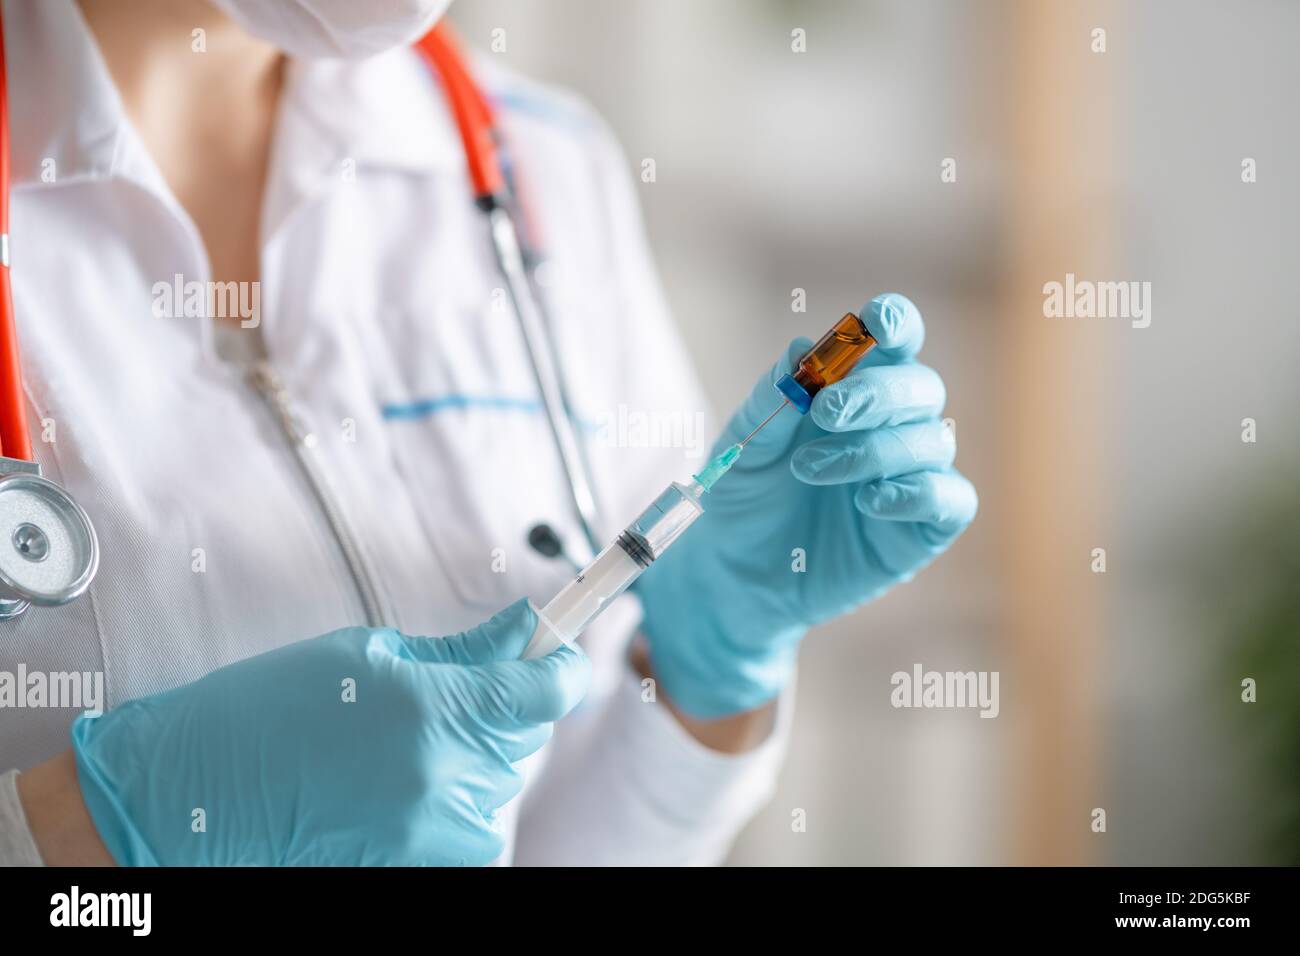 Medical doctor or laborant holding injection vaccine. Concept of Covid-19 treatment and prevention. Stock Photo